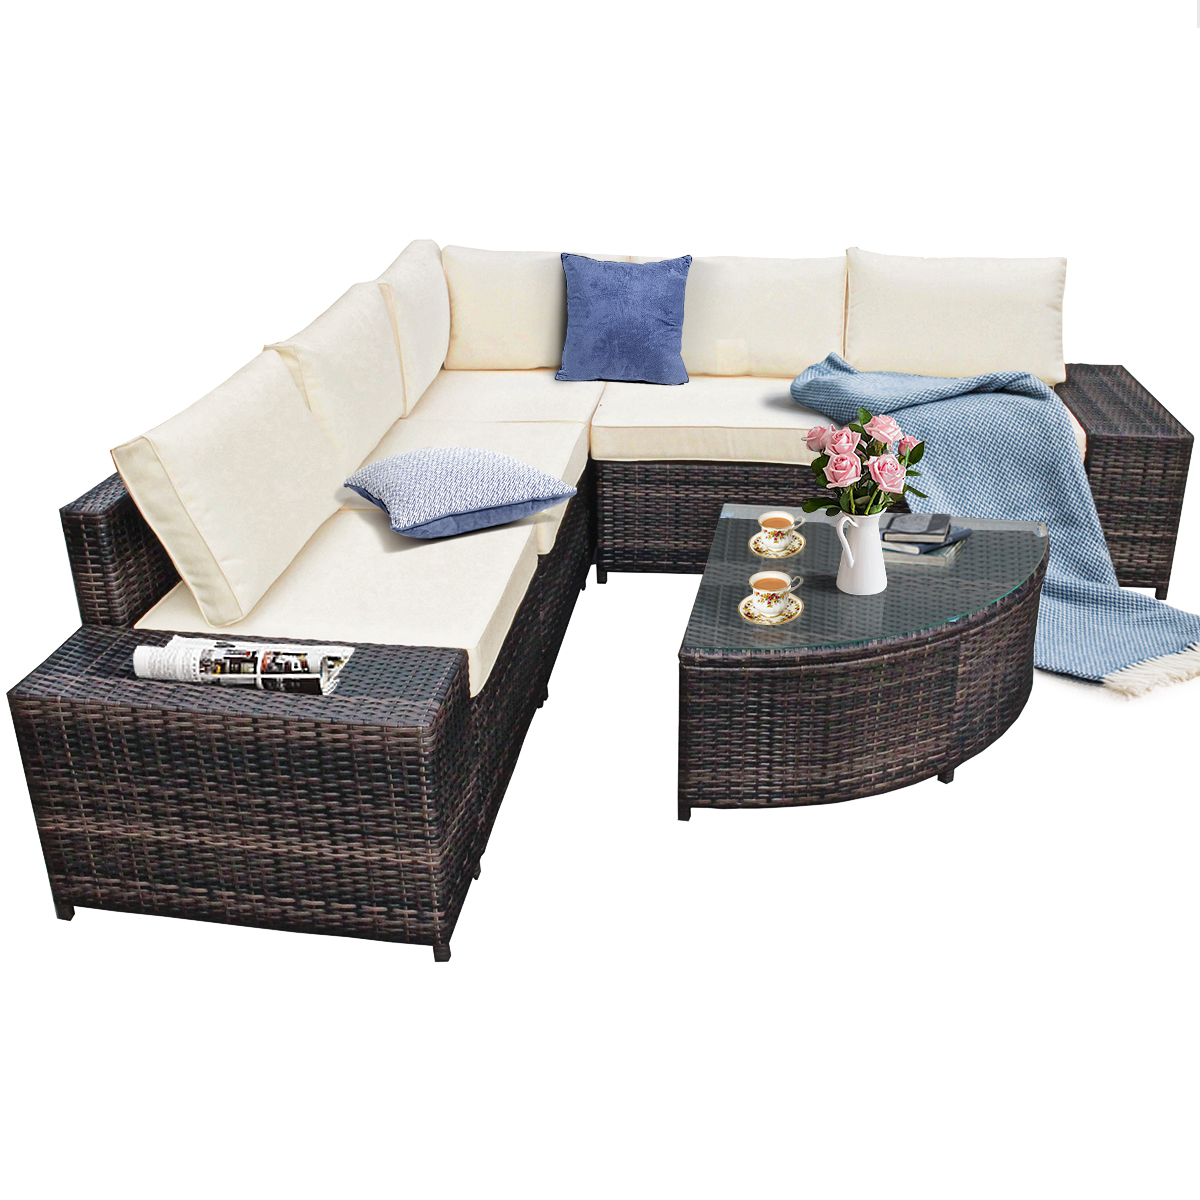 Patiojoy 6-Piece Outdoor Rattan Conversation Set Sectional Sofa Set with Arc-Shaped Table White - image 5 of 6